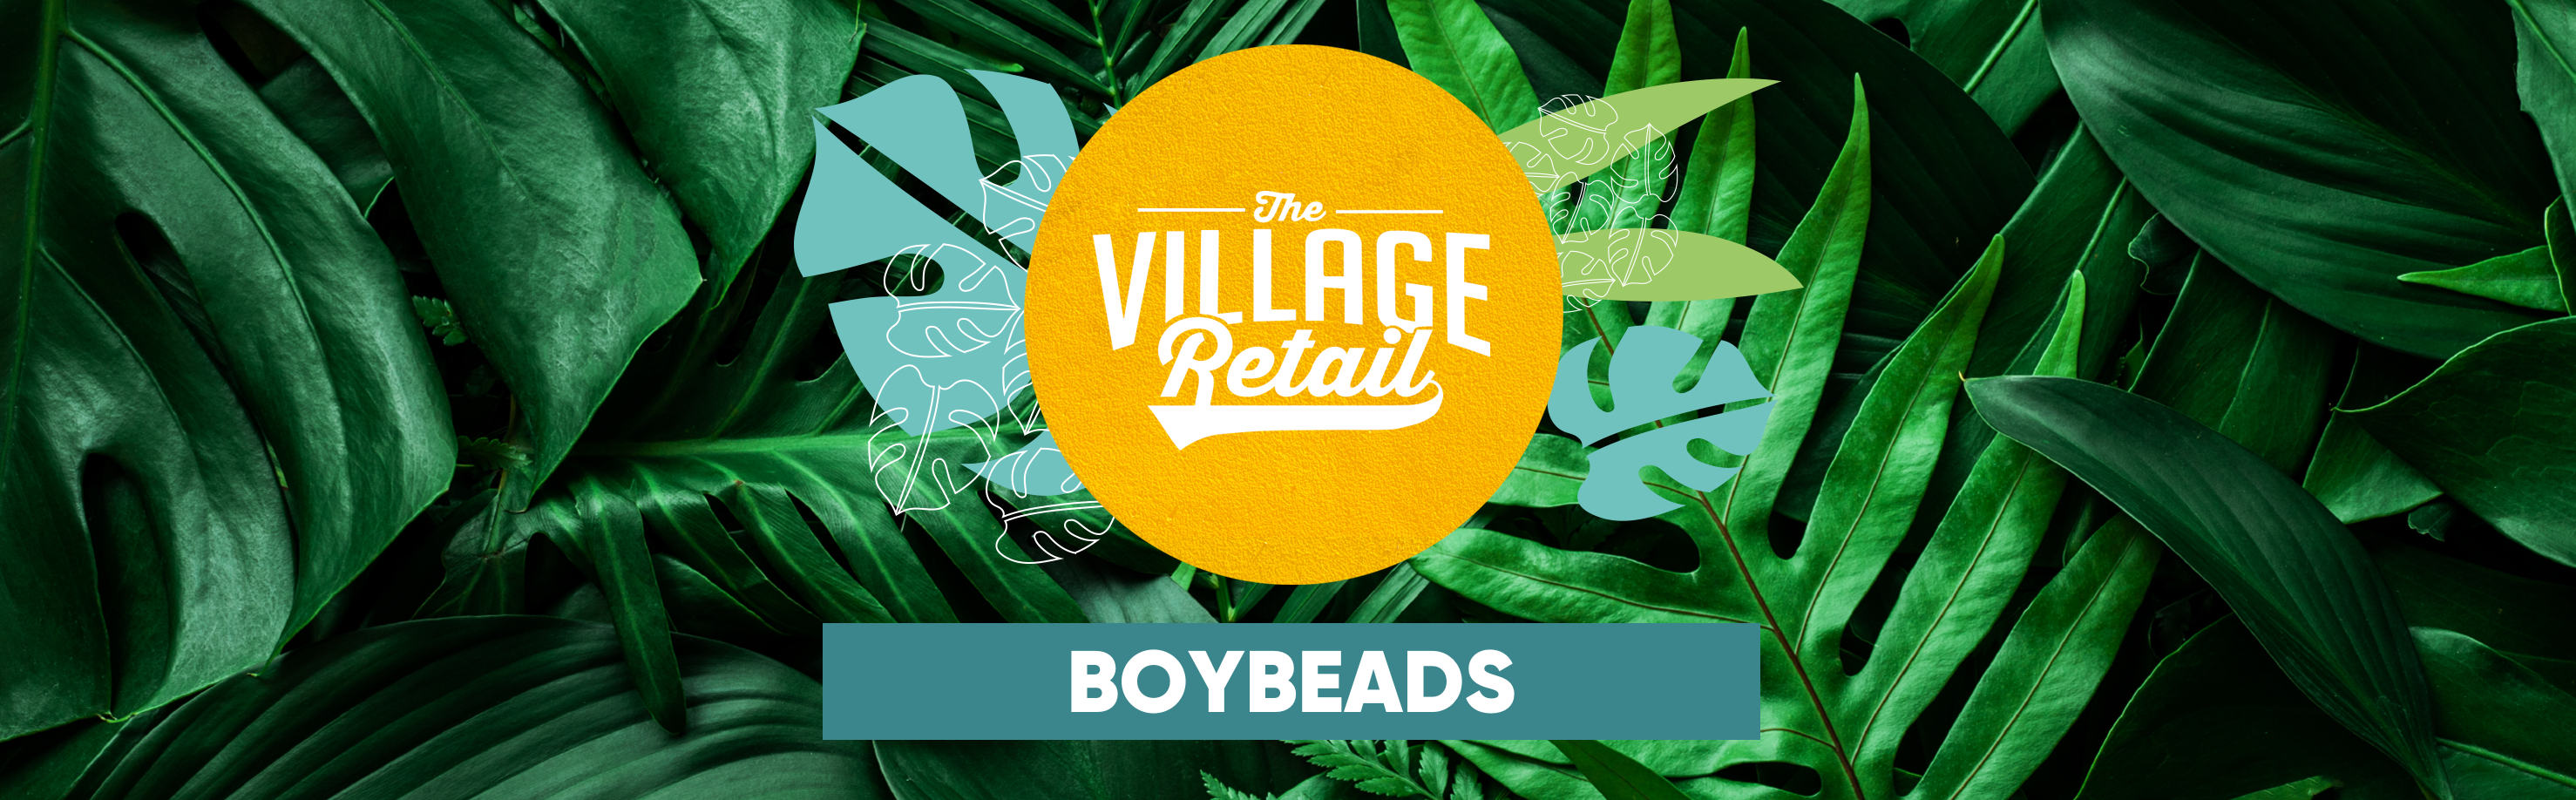 VR-Brand Header -Boybeads.png__PID:0eb33615-700a-431c-ba98-707189bfd623